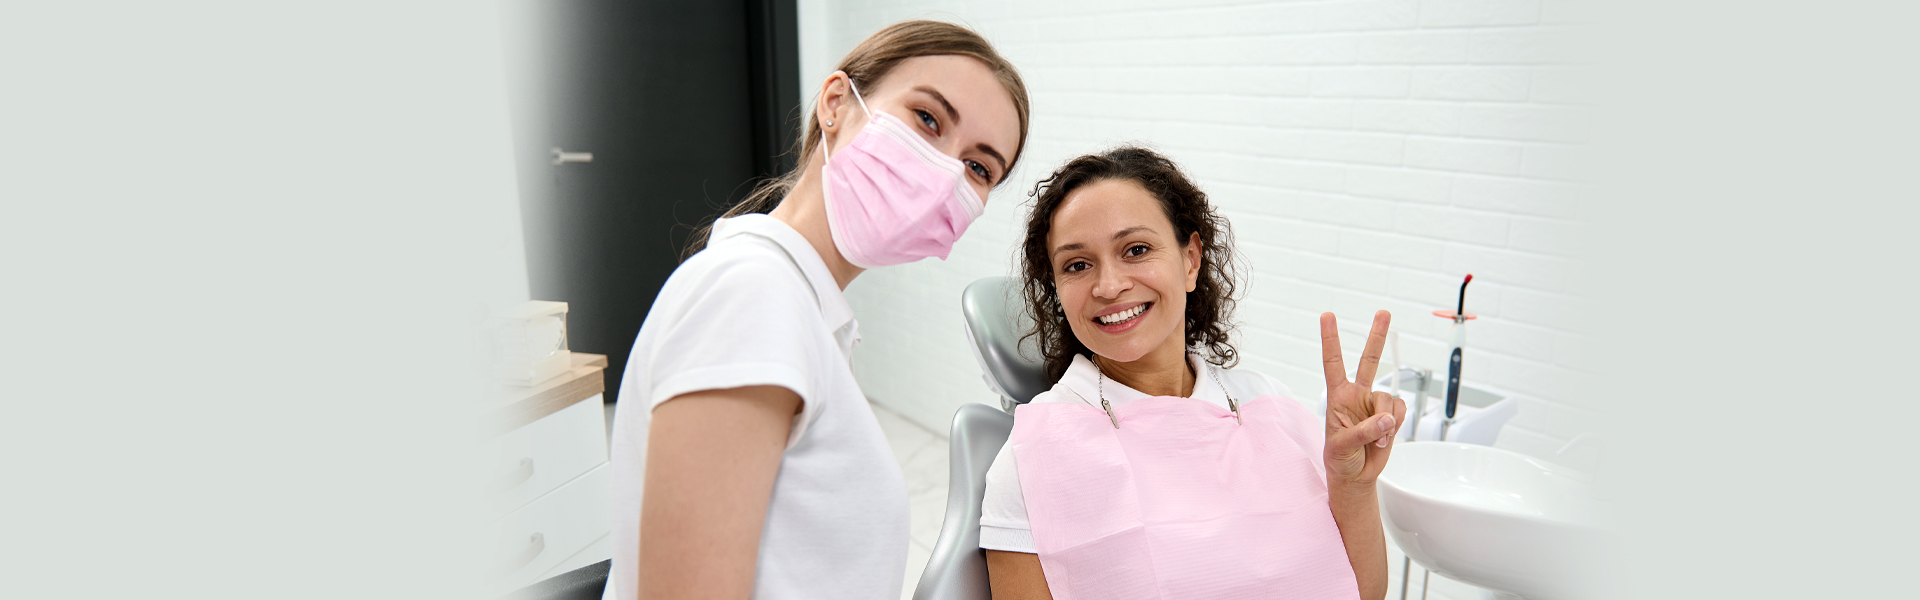 Why Would You Need the Services of an Emergency Dentist?